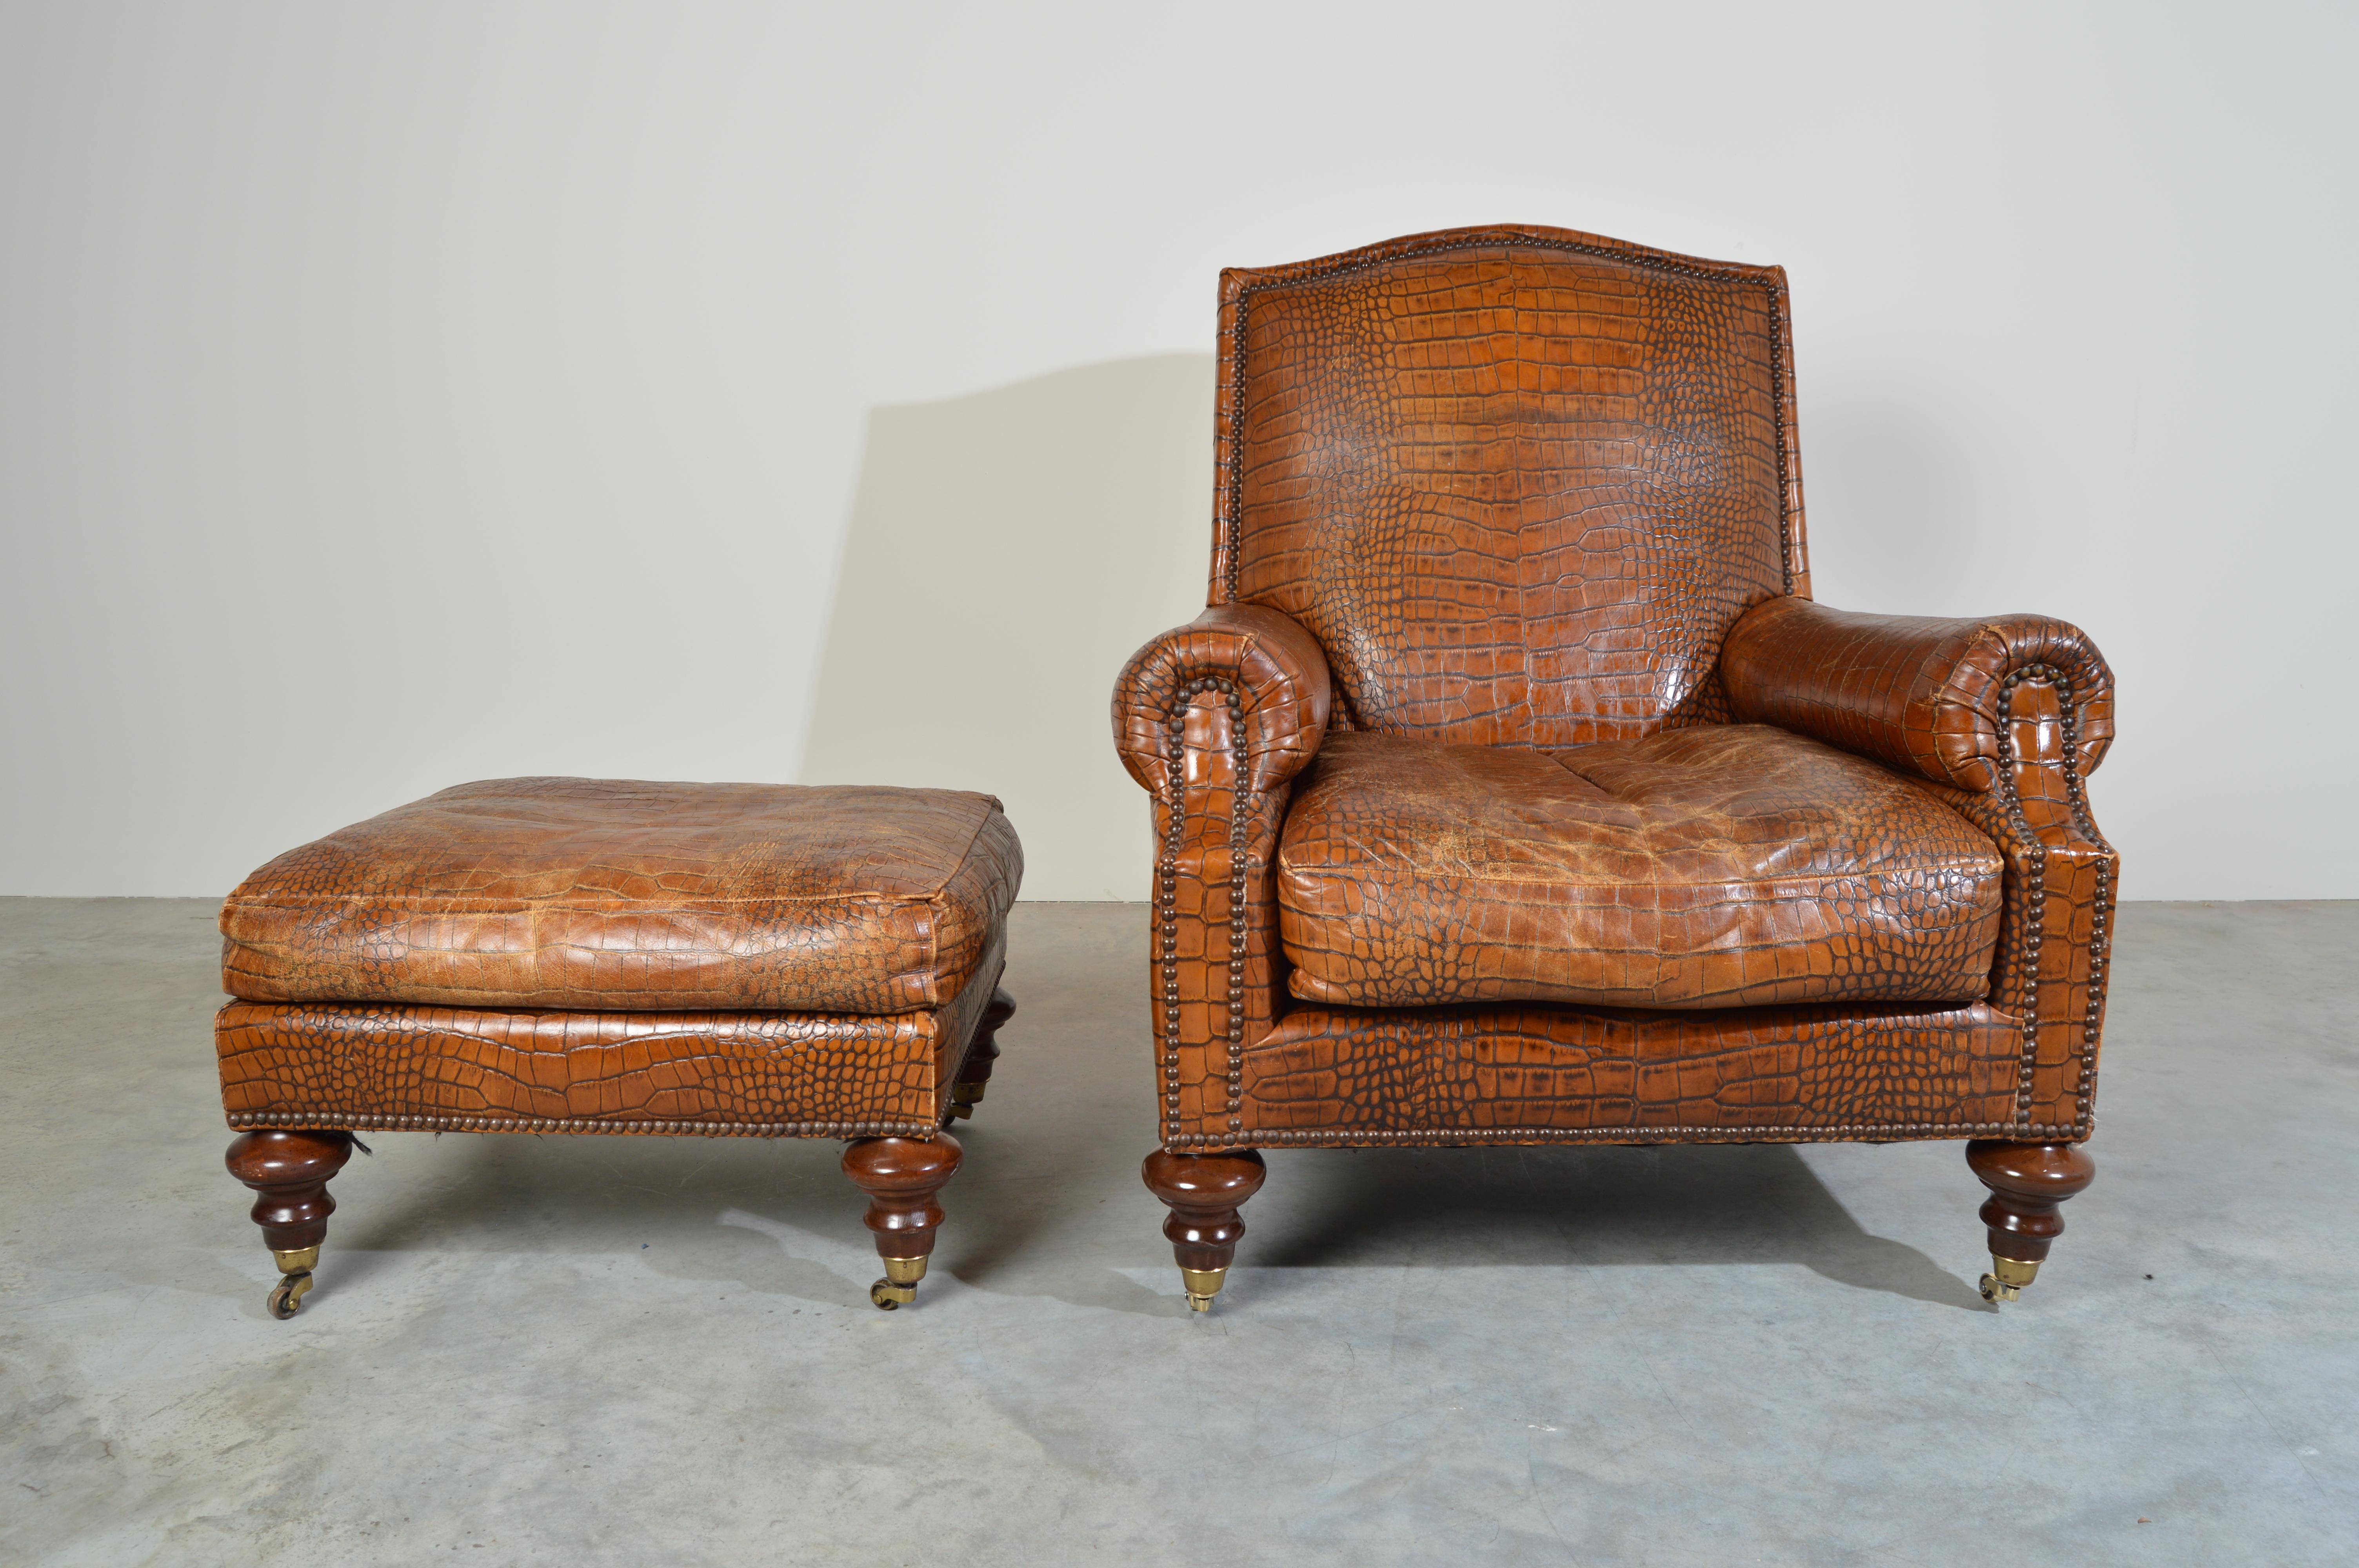 English Regency Gator Embossed Lounge Chair and Ottoman by Pearson 1